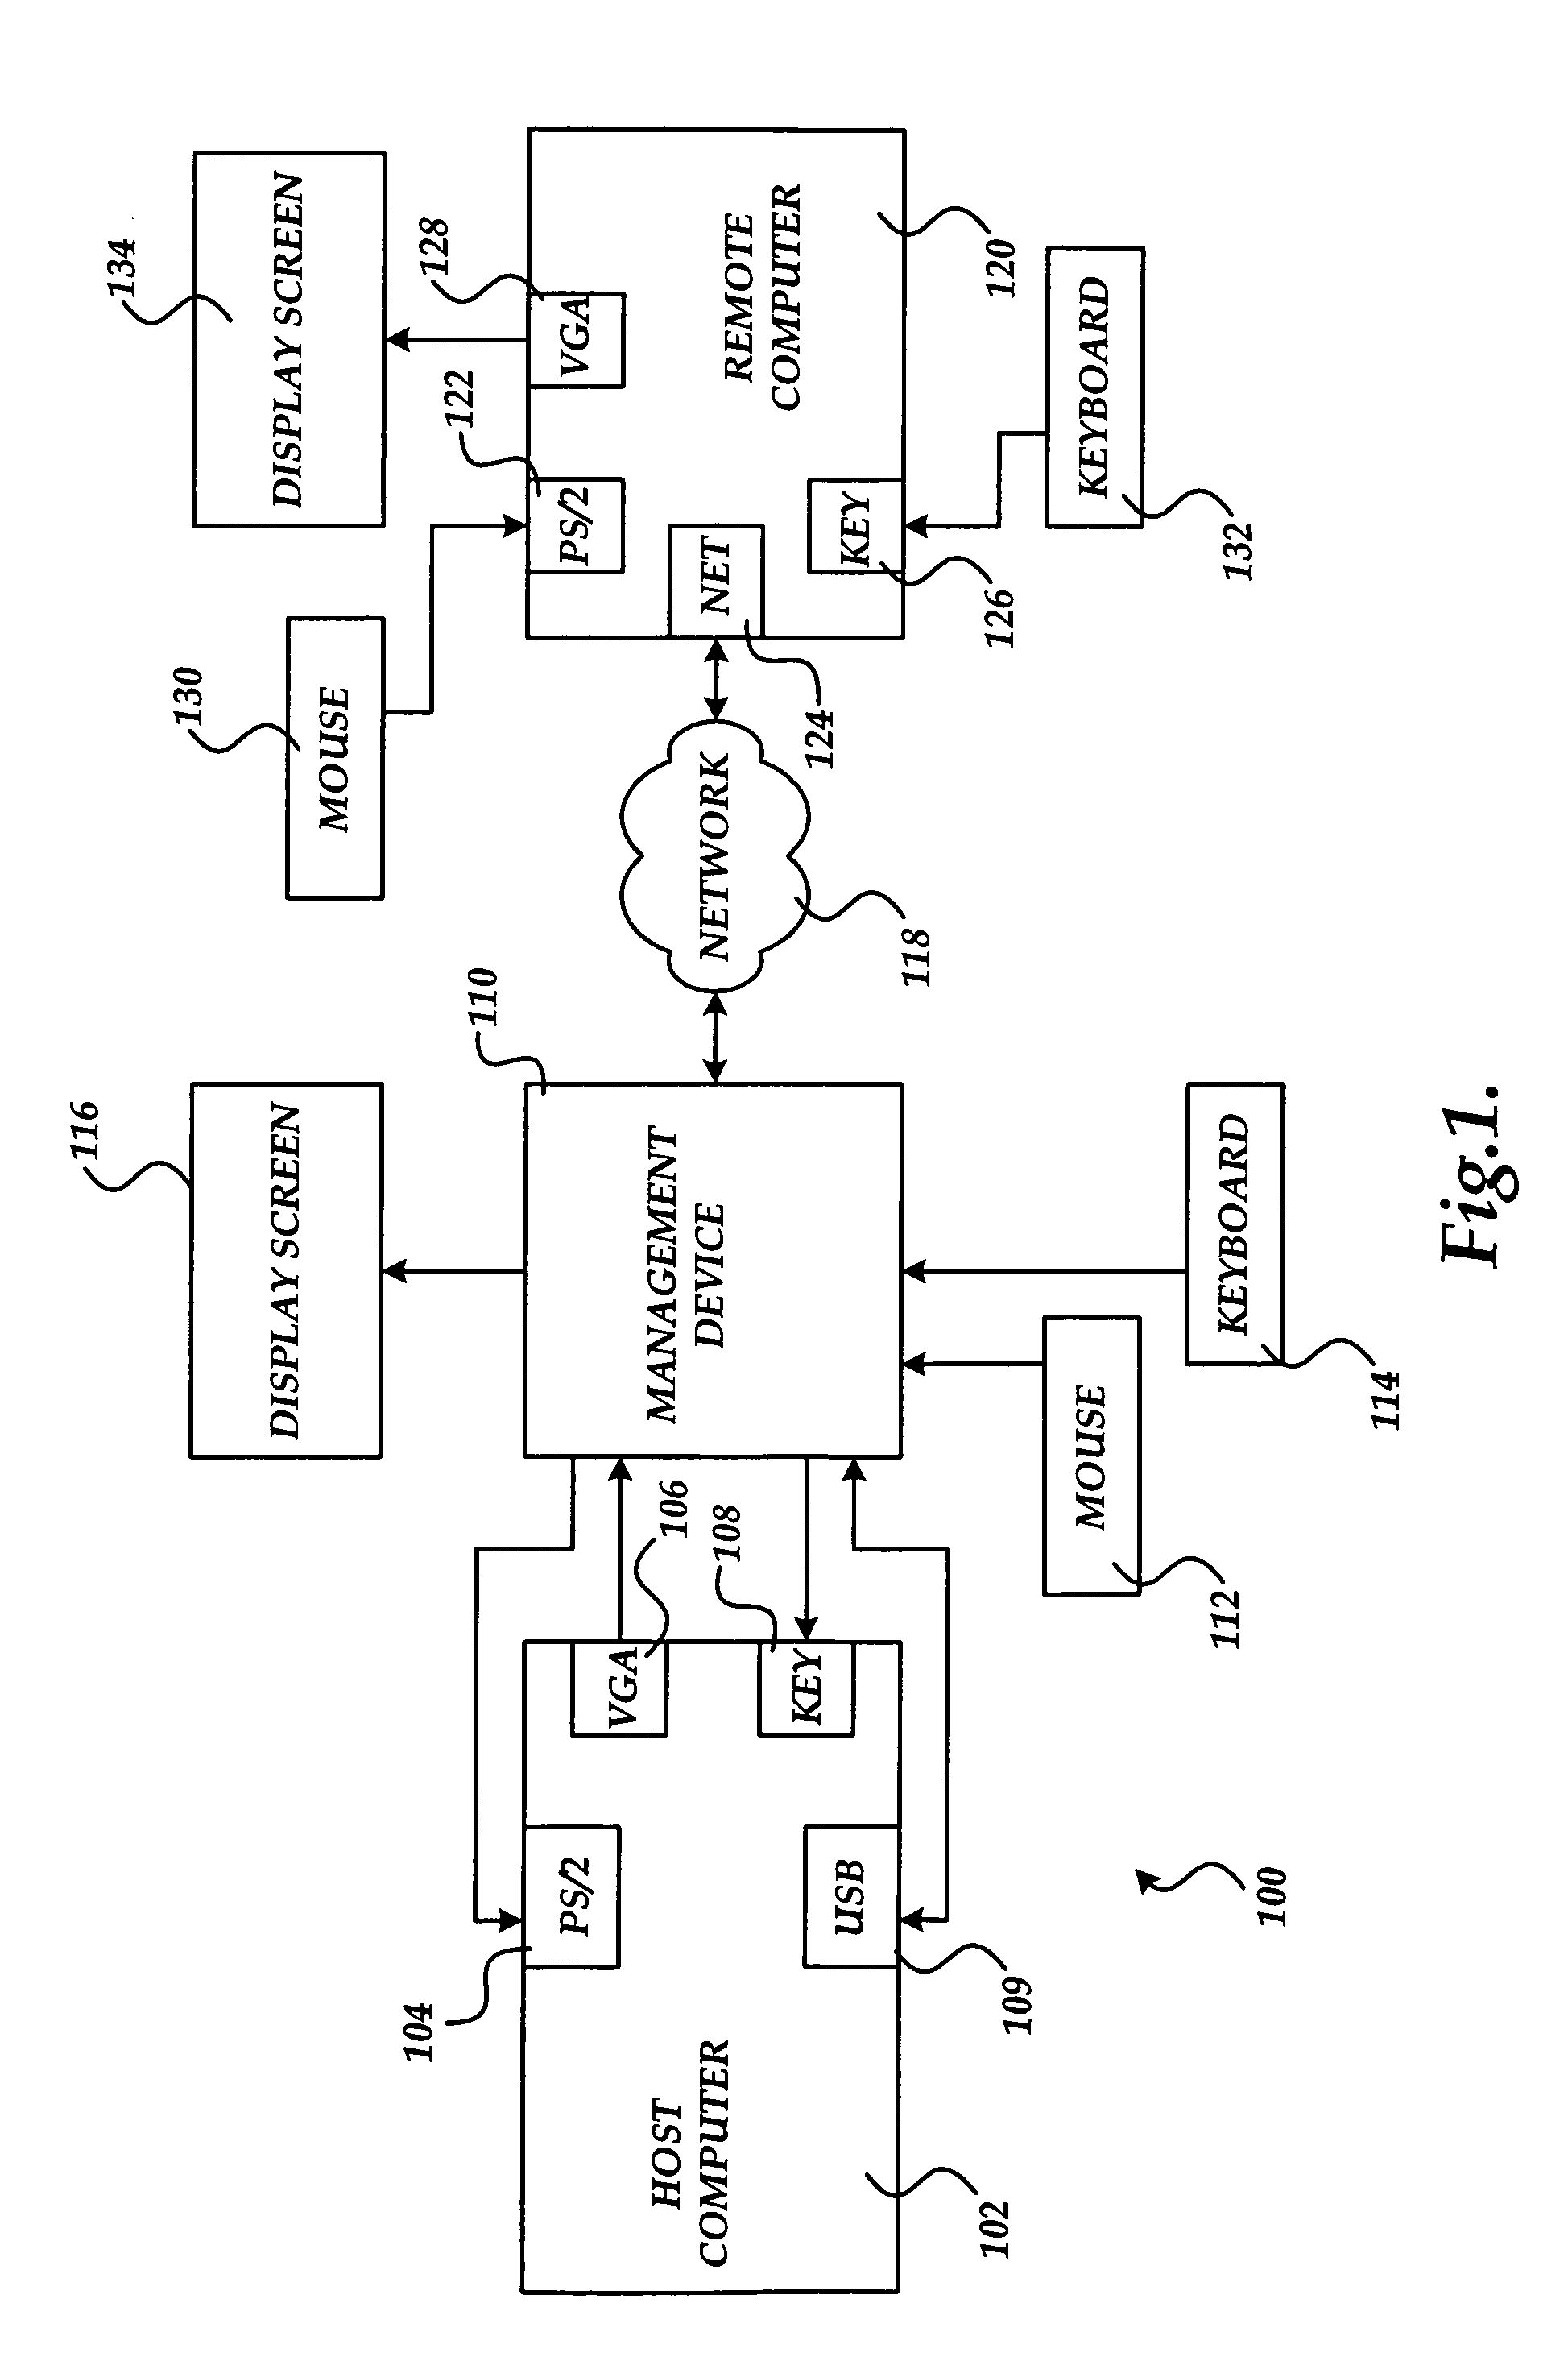 Universal serial bus system interface for intelligent platform management interface communications